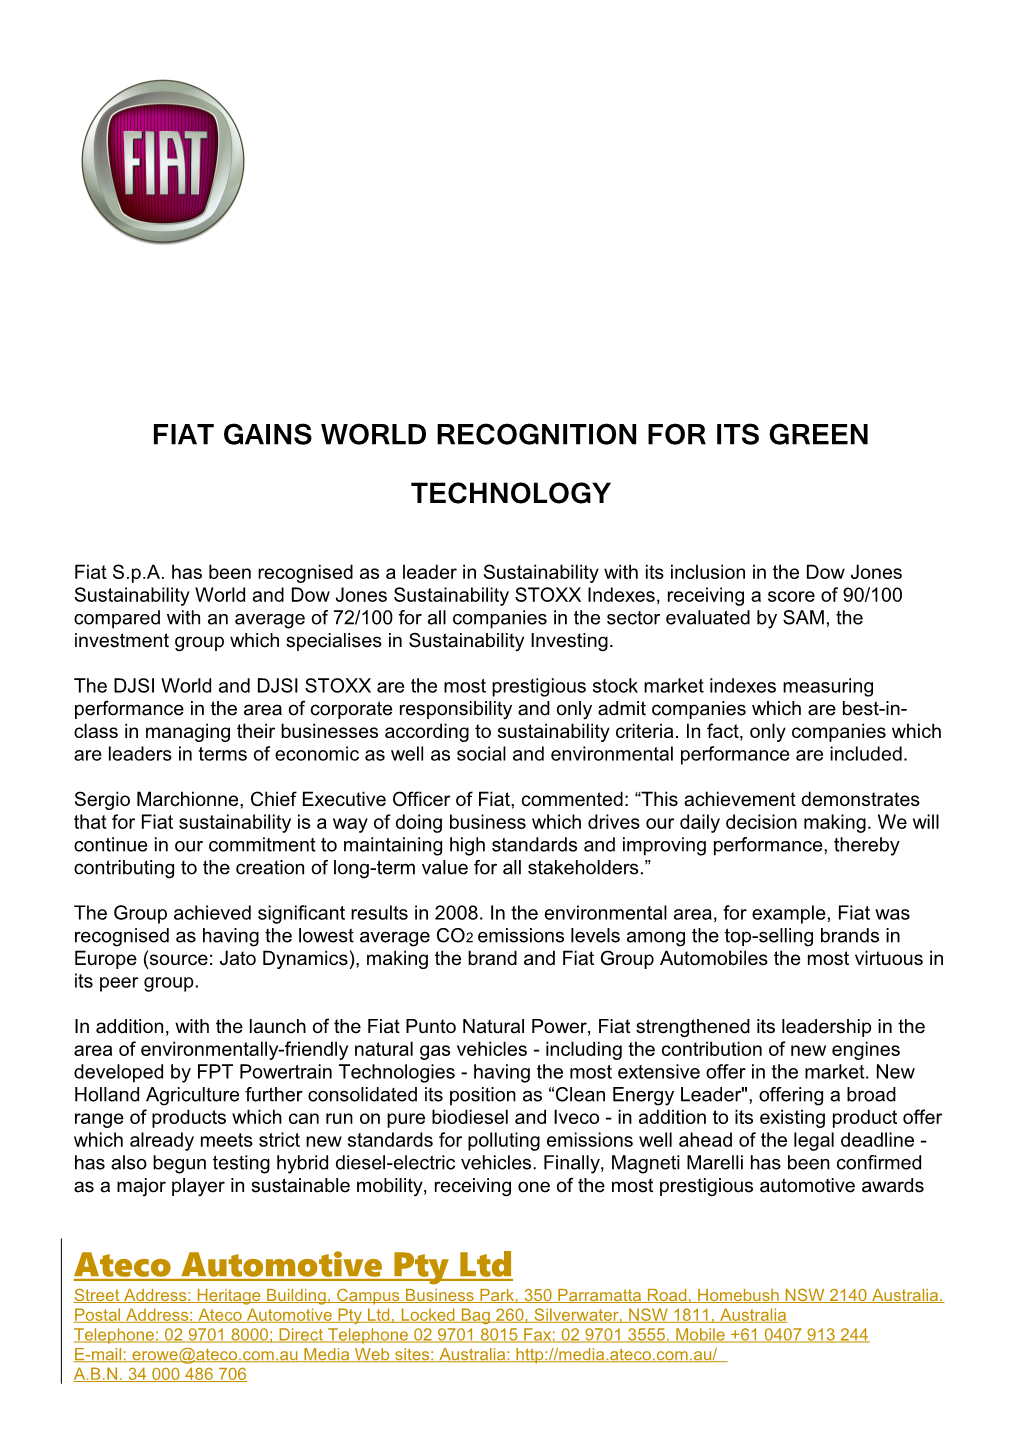 Fiat Gains World Recognition for Its Green Technology